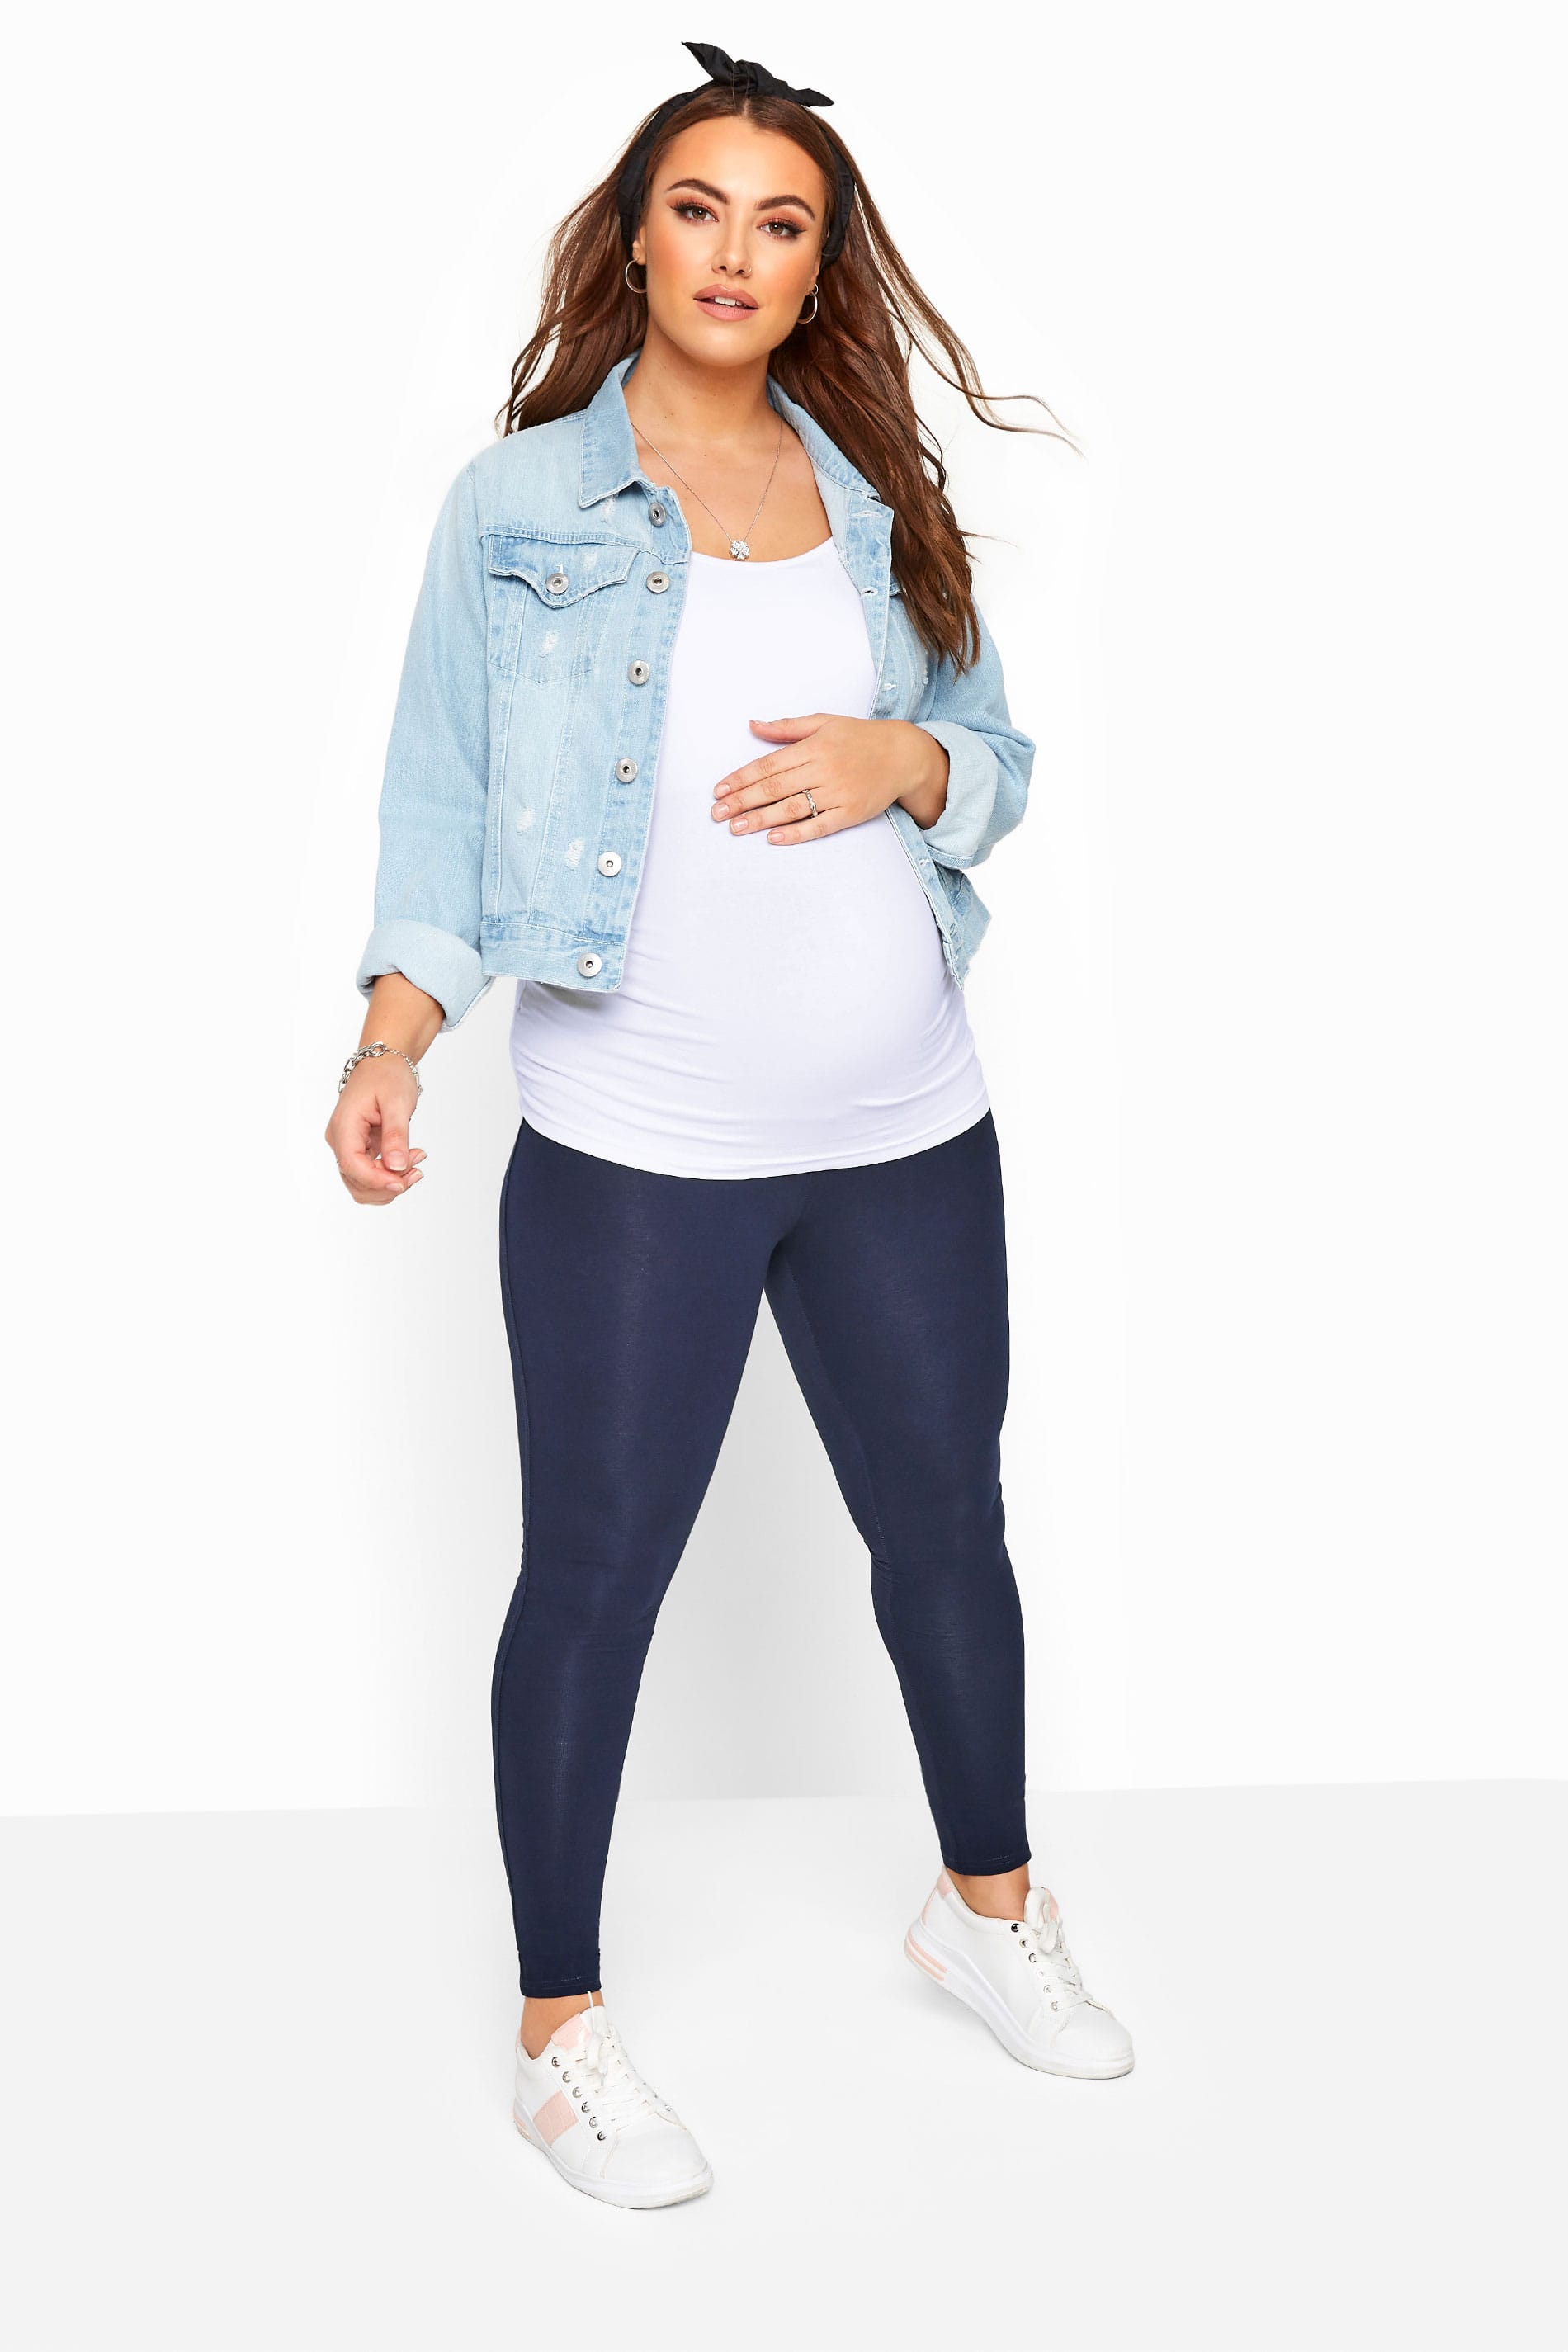 Yours Clothing Bump it up maternity navy cotton essential leggings with comfort panel